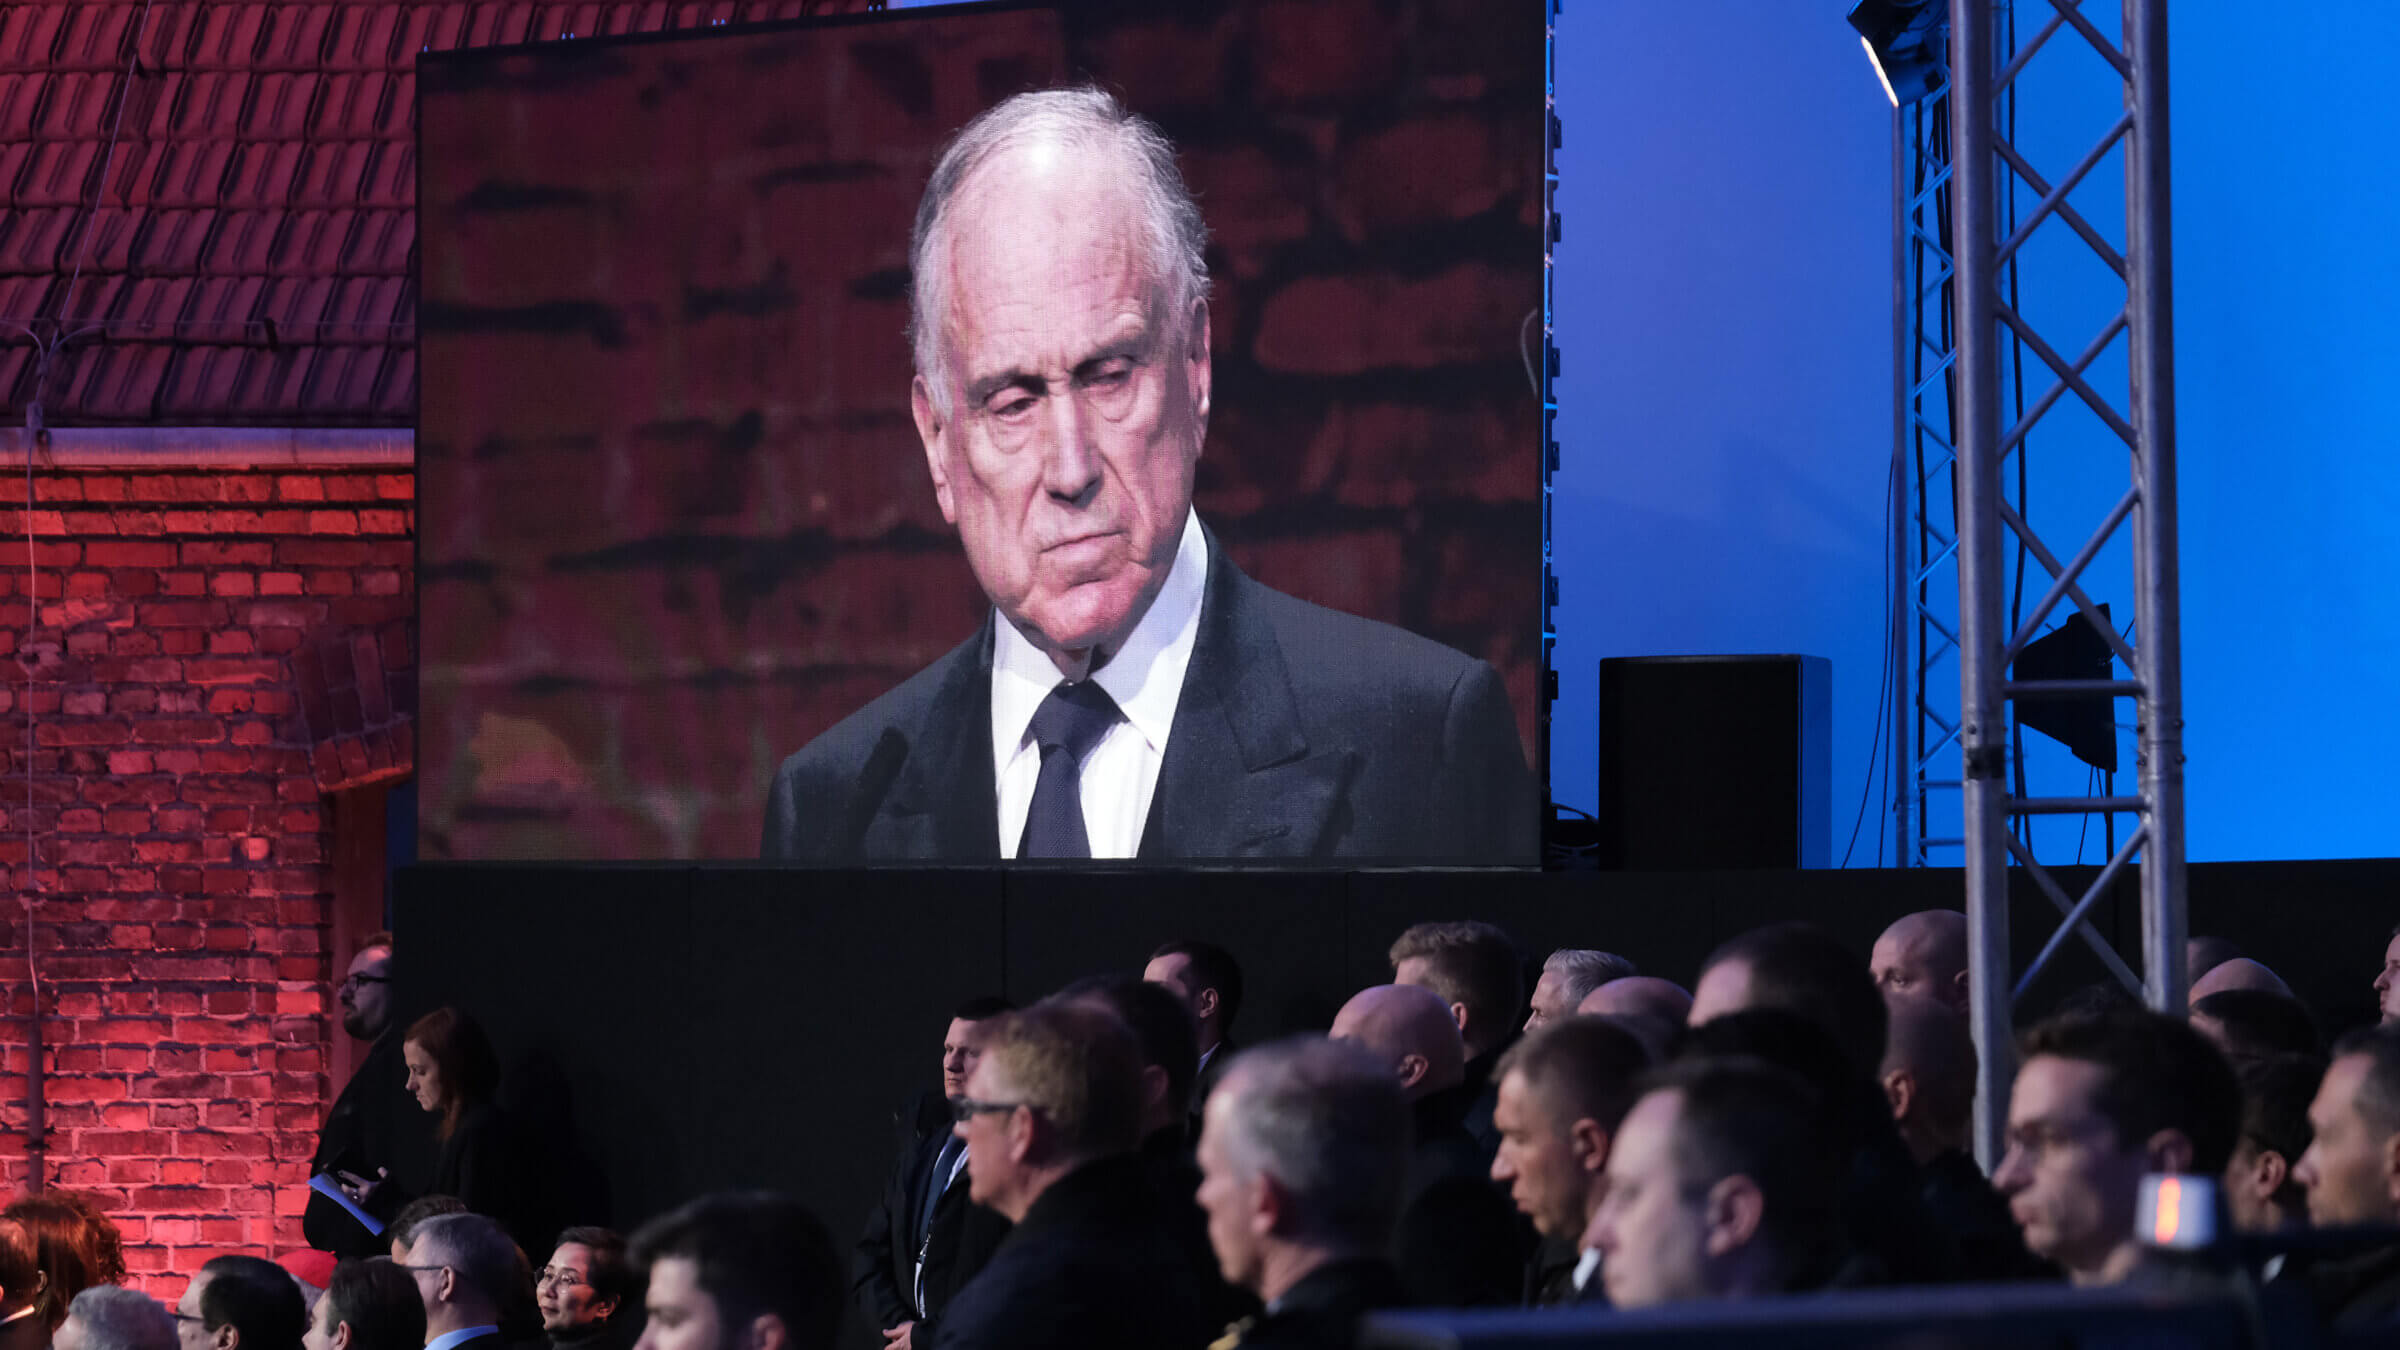 Ronald Lauder, the philanthropist and cosmetics billionaire, pledged $25 million to create the Anti-Semitism Accountability Project in 2019. But Lauder never appears to have created the nonprofit or political action committee he promised, and the initiative quickly went dormant.